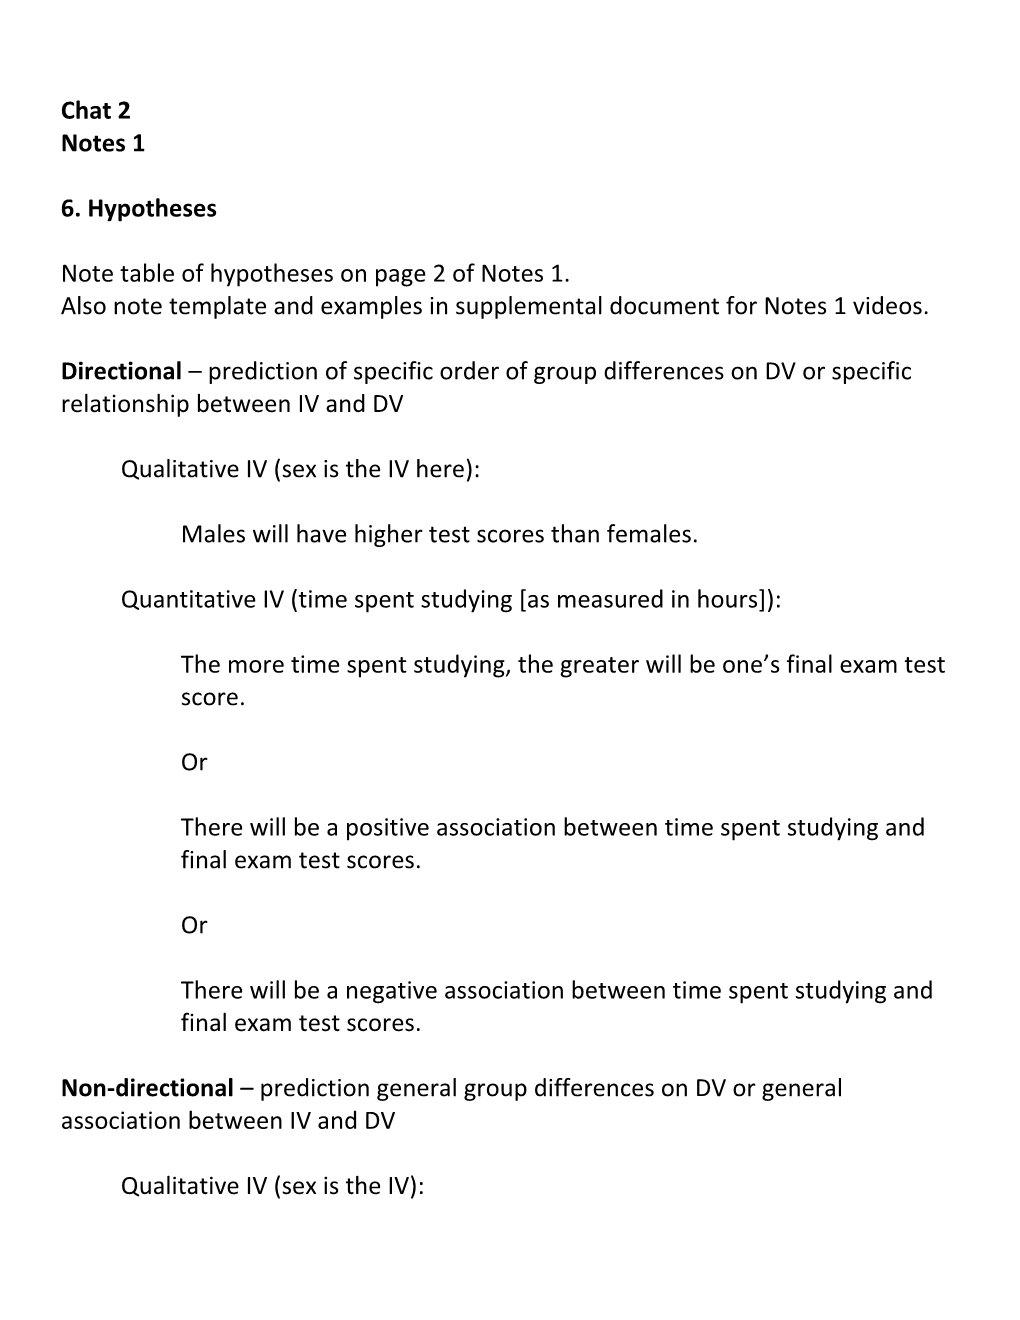 Note Table of Hypotheses on Page 2 of Notes 1